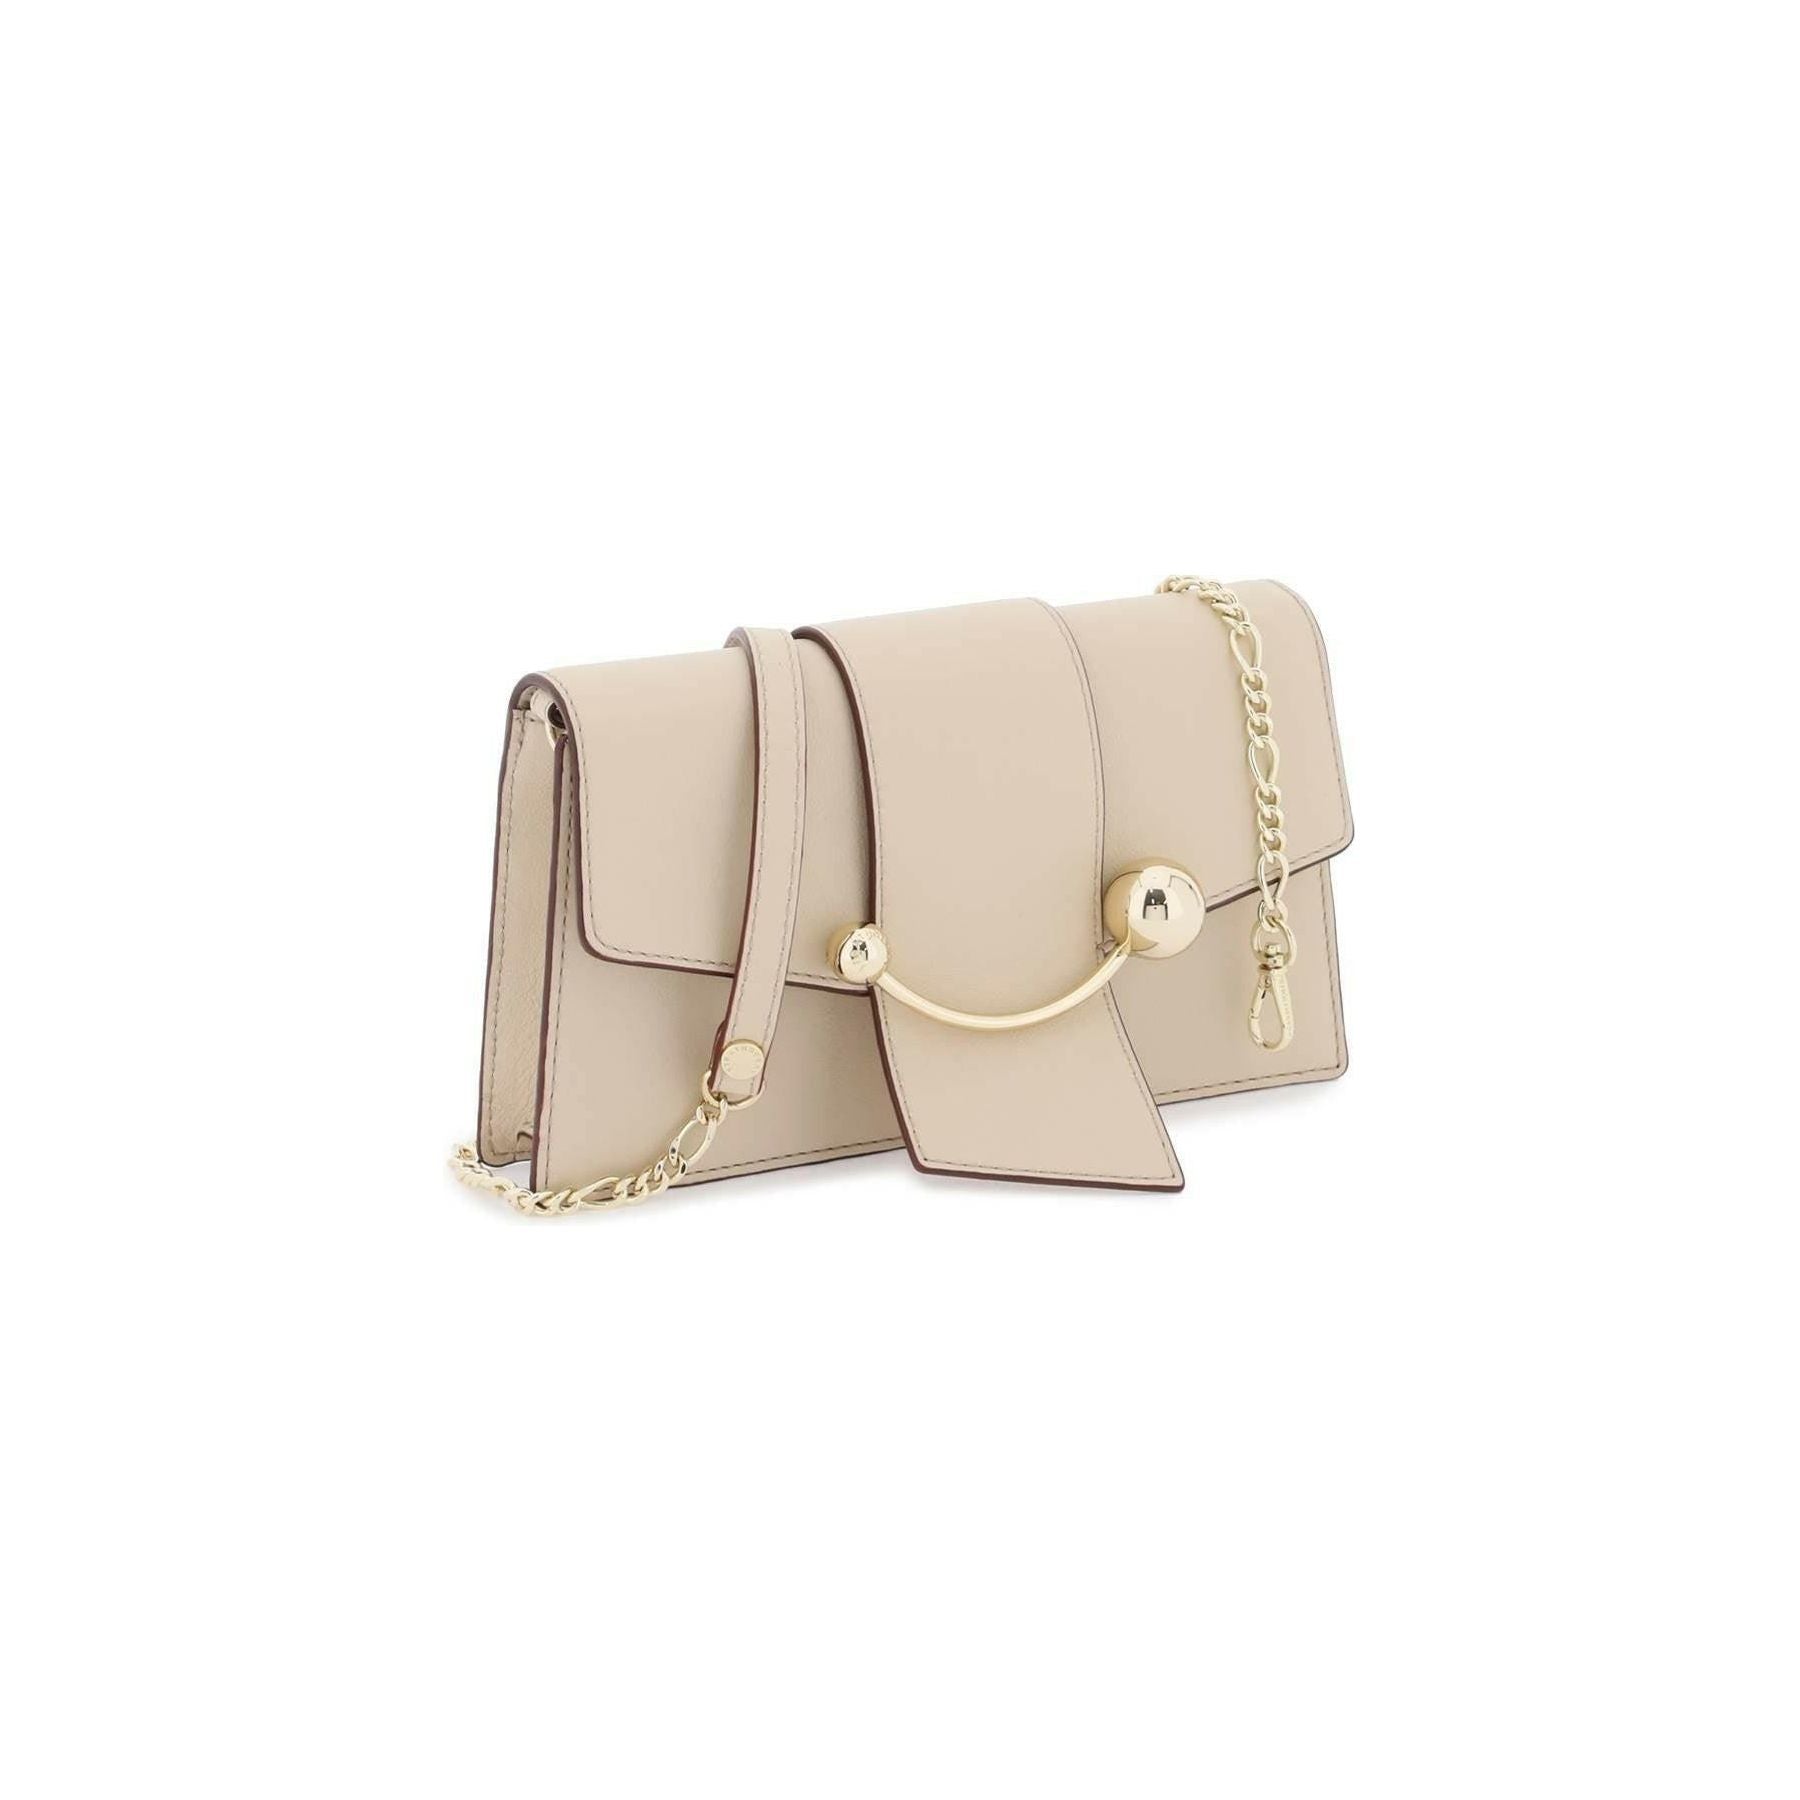 Oat Beige 'Crescent On A Chain' Leather Bag STRATHBERRY JOHN JULIA.